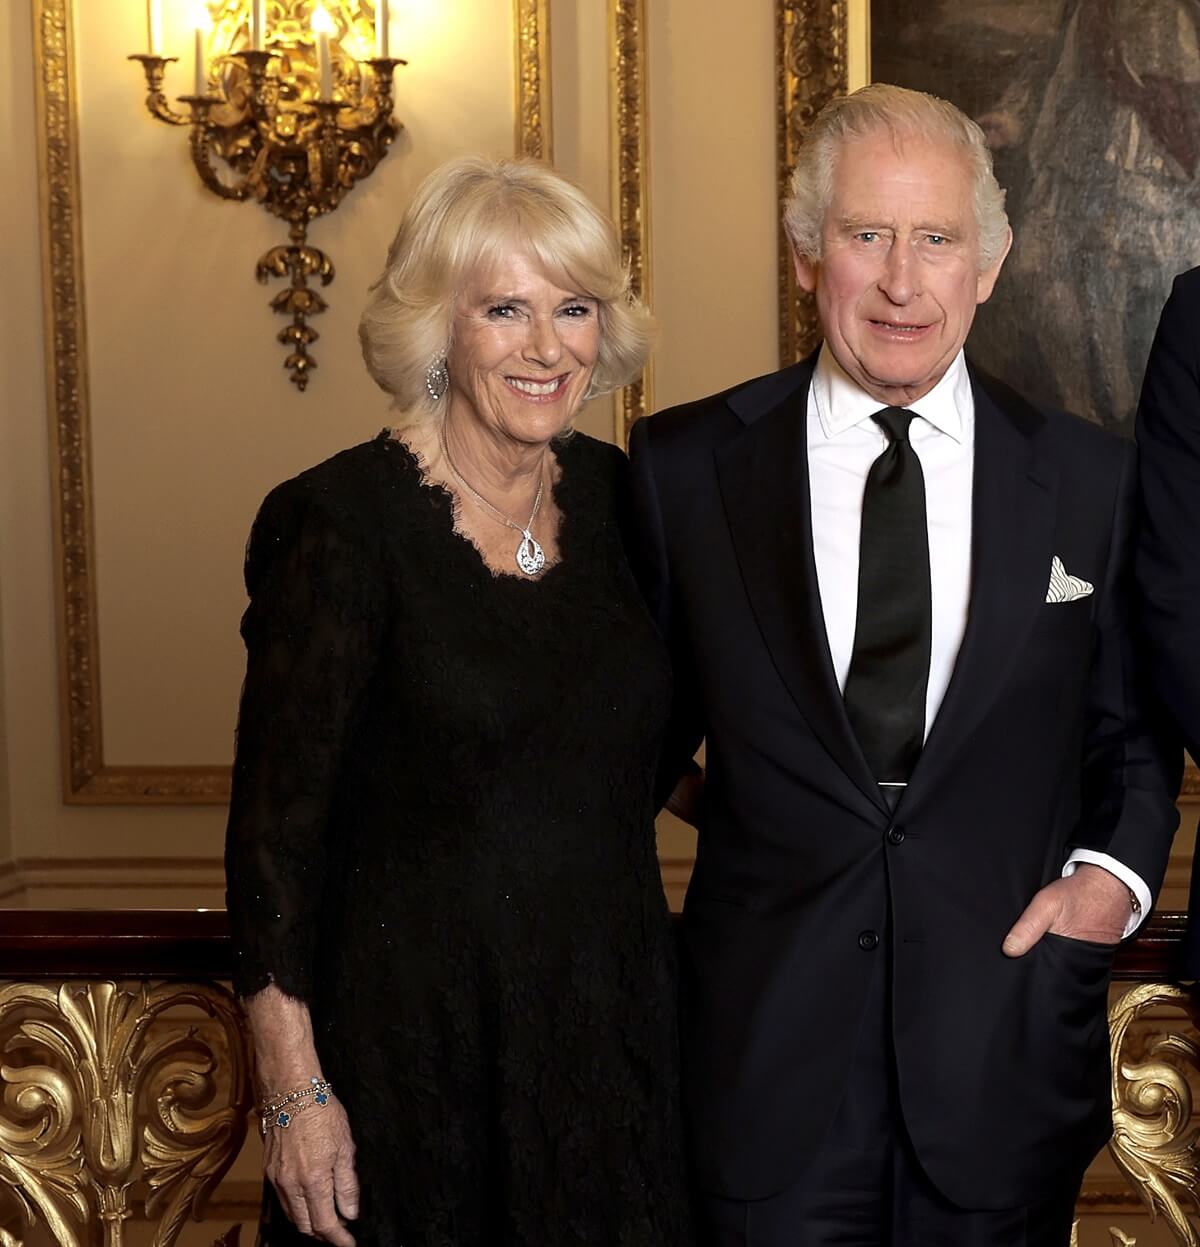 King Charles III and Queen Camilla pose for a photo ahead of reception for Heads of State and Official Overseas Guests at Buckingham Palace